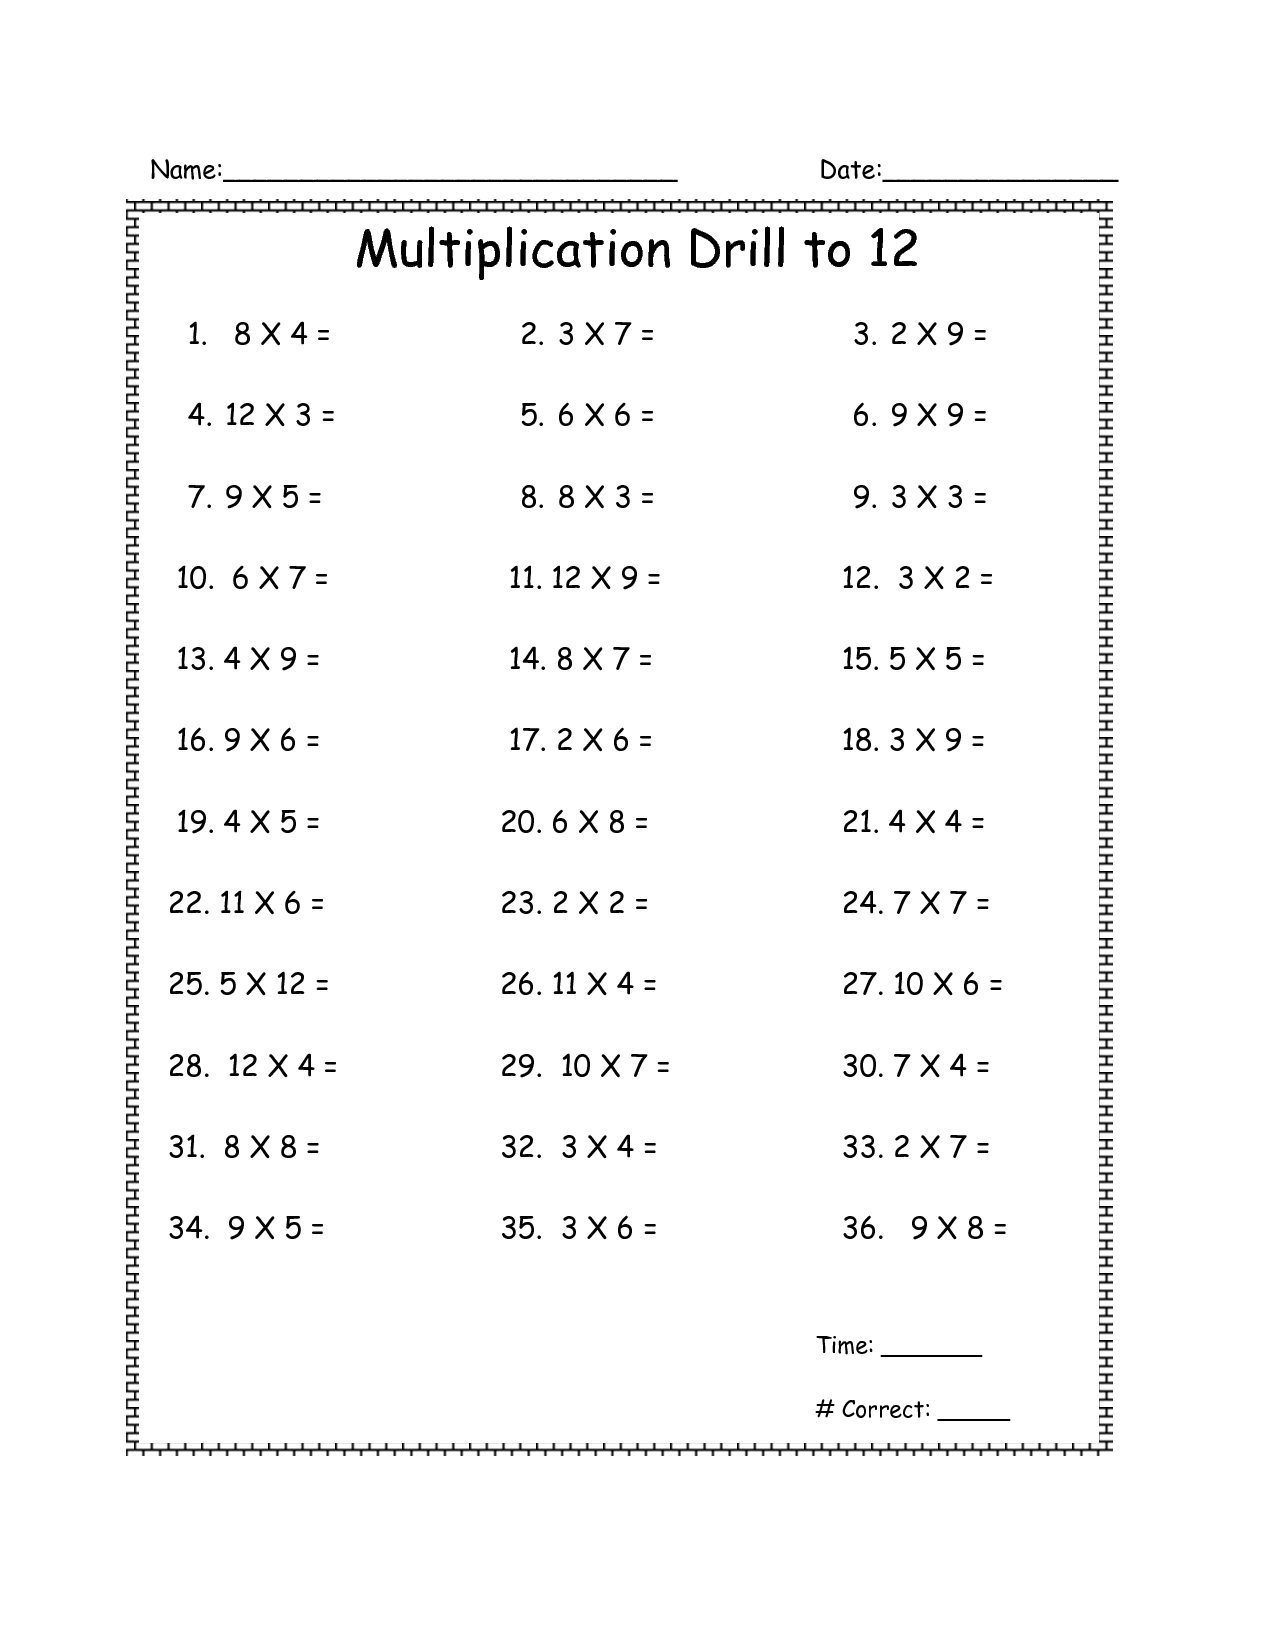 15-best-images-of-multiplication-drill-worksheets-math-fact-worksheets-multiplication